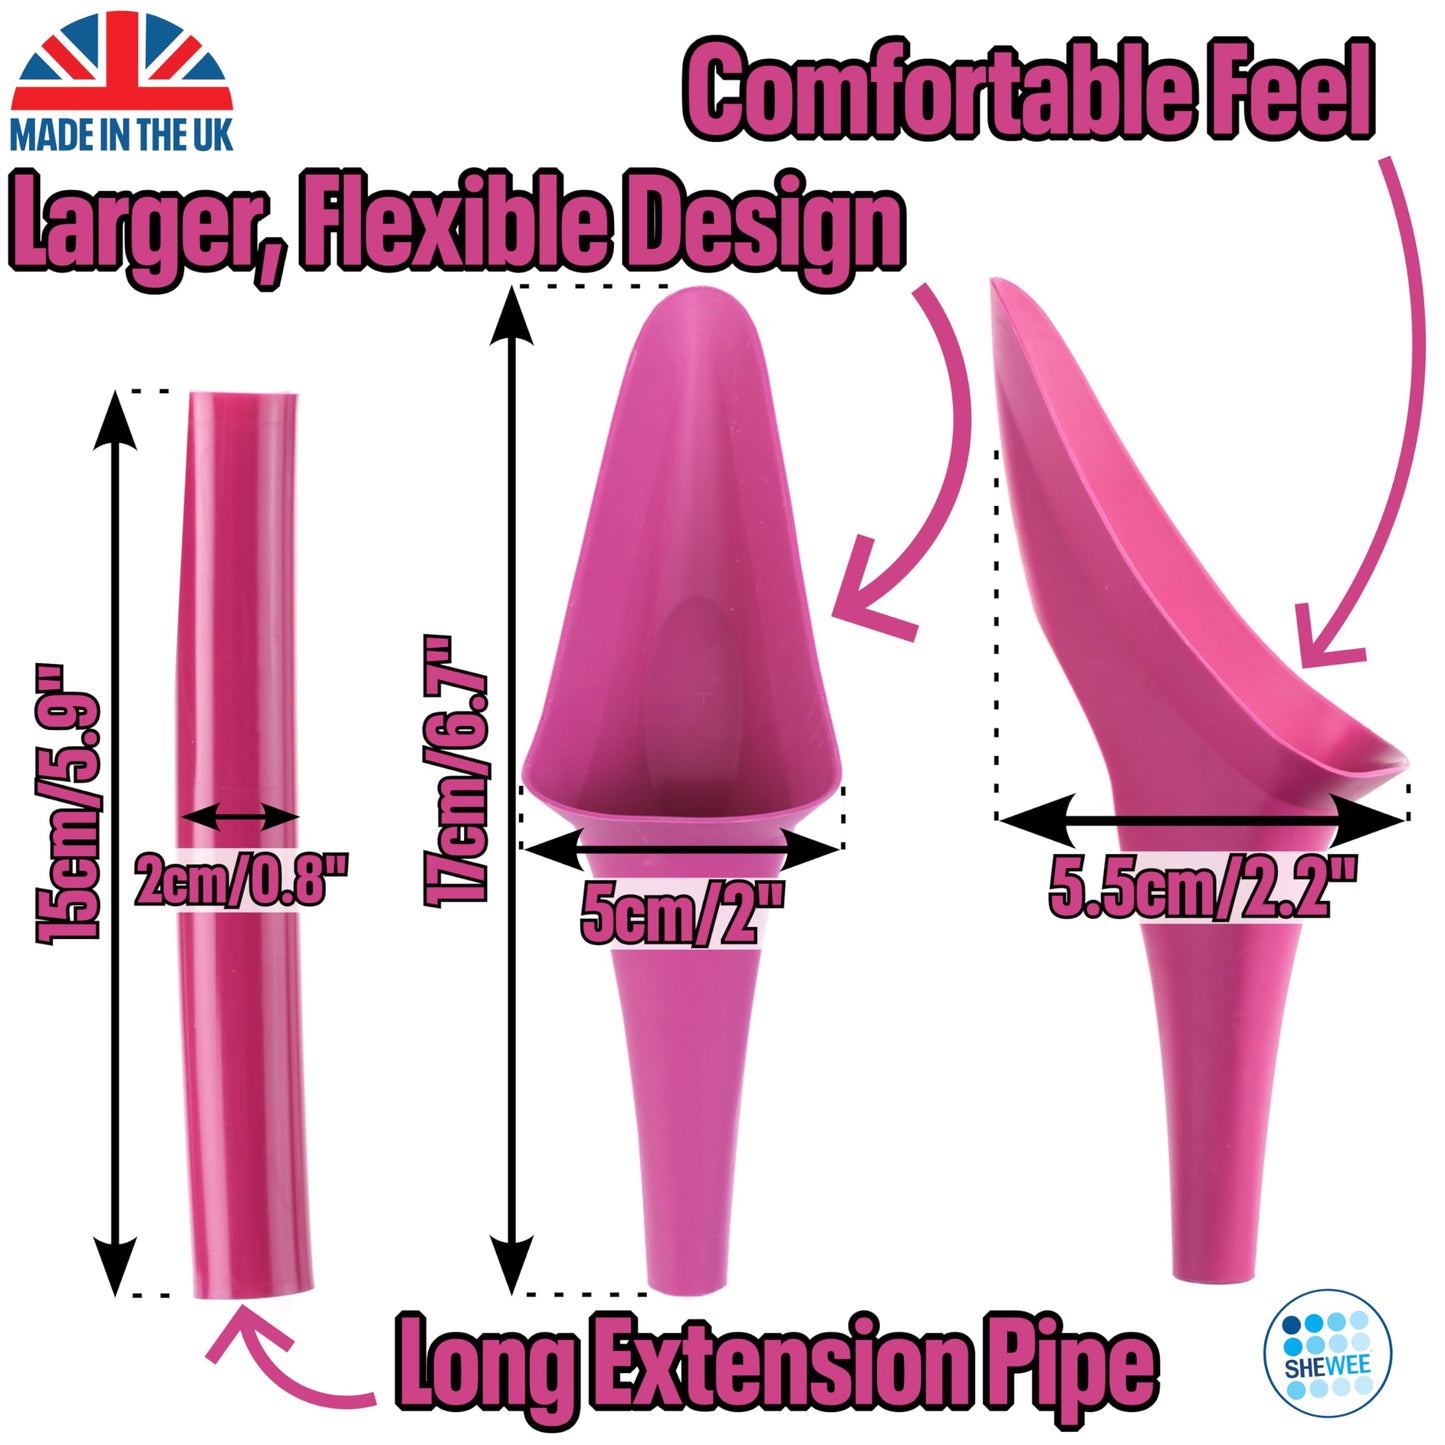 SHEWEE Flexi - Reusable Pee Funnel – A Flexible, Larger Version Of The Original Female Urination Device Since 1999! Quickly, Easily and Discreetly, Wee Standing Up. Comes with an Extension Pipe.